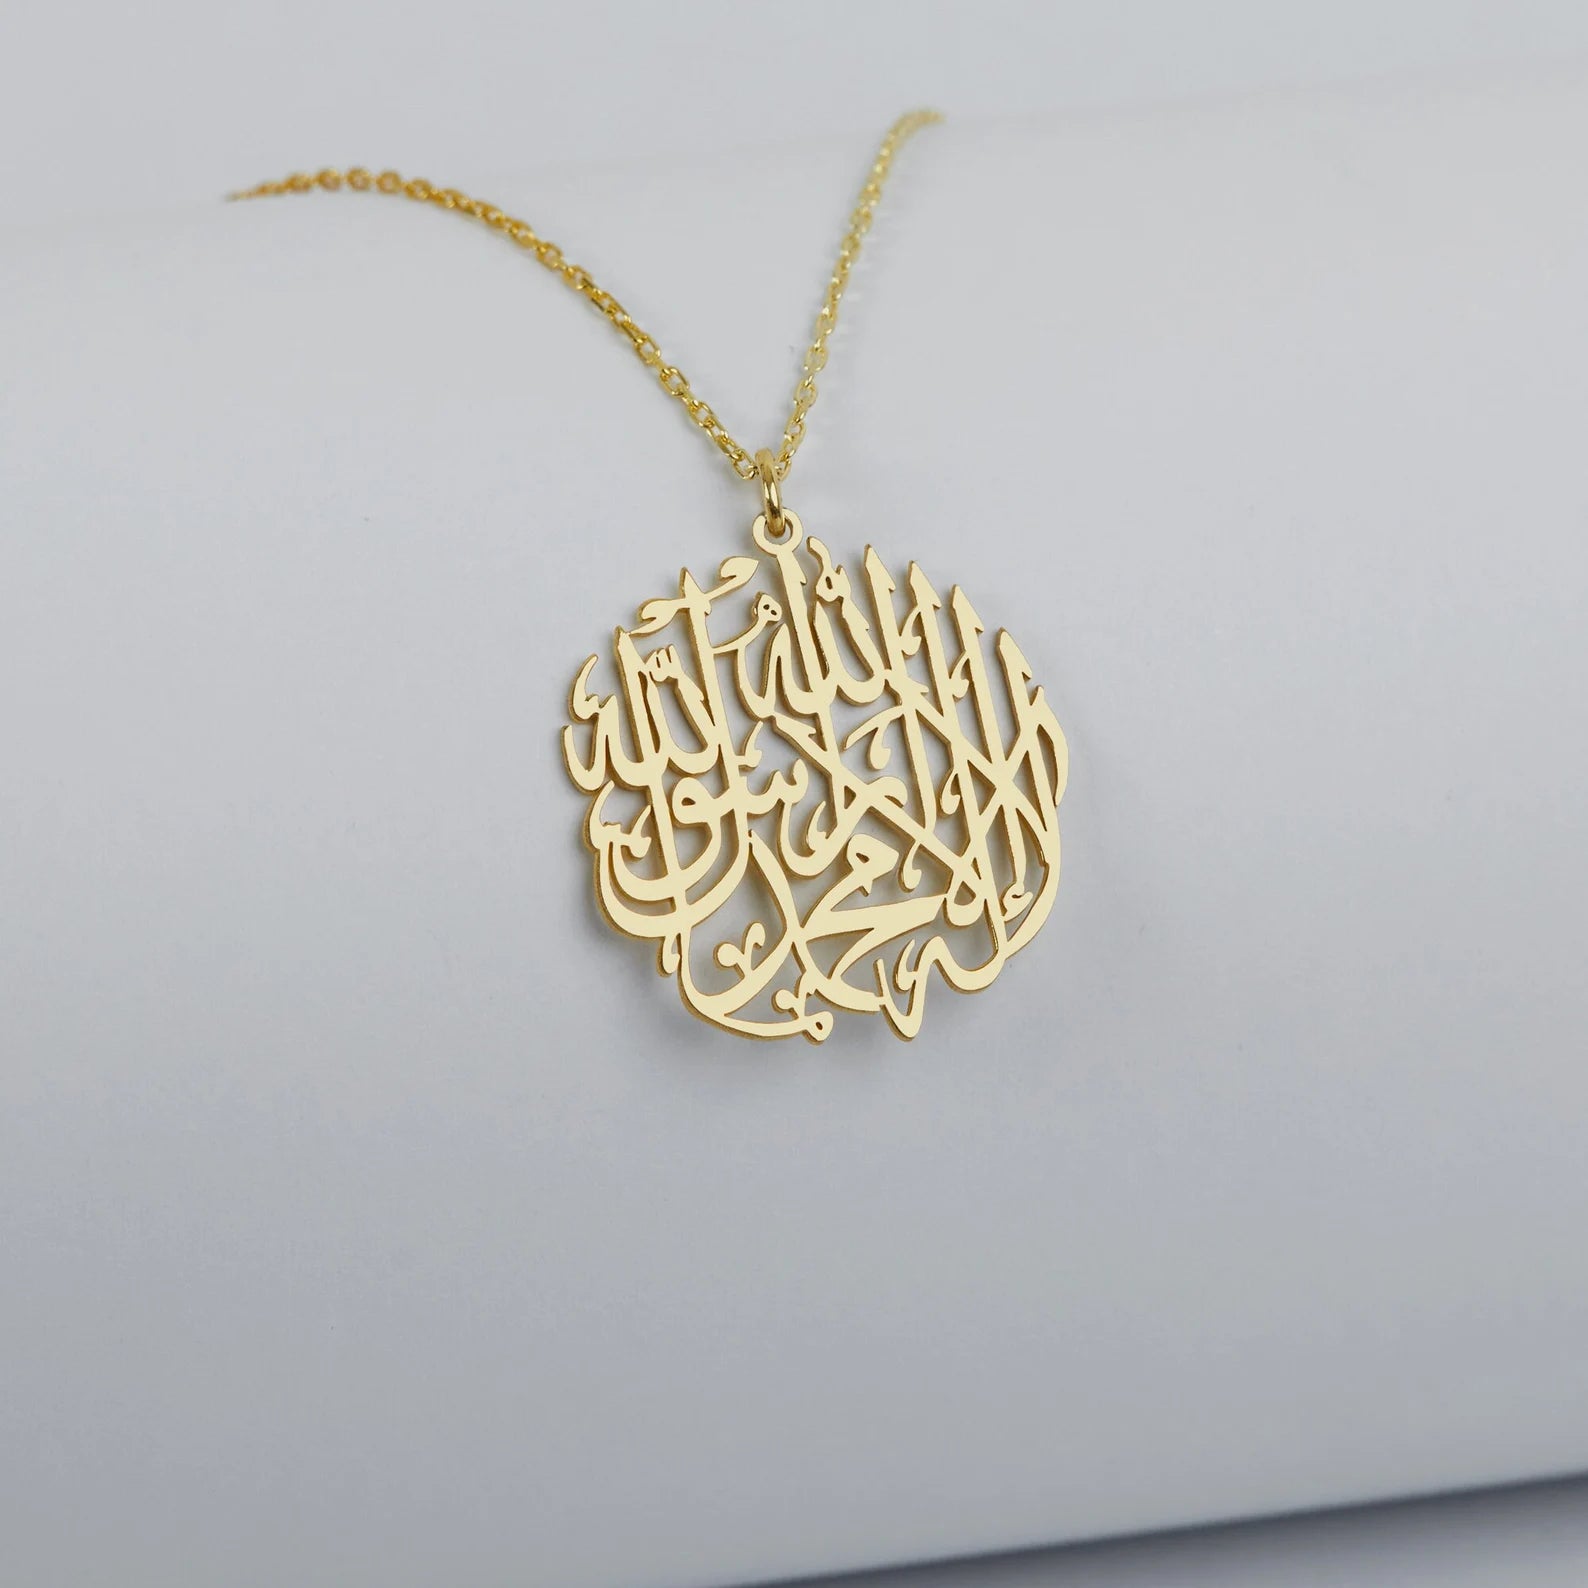 Arabian Islamic calligraphy pendant made in real gold. Designed and handcrafted in the UAE. This authentic pendant is locally handcrafted with the highest quality materials and artisans available in Dubai.